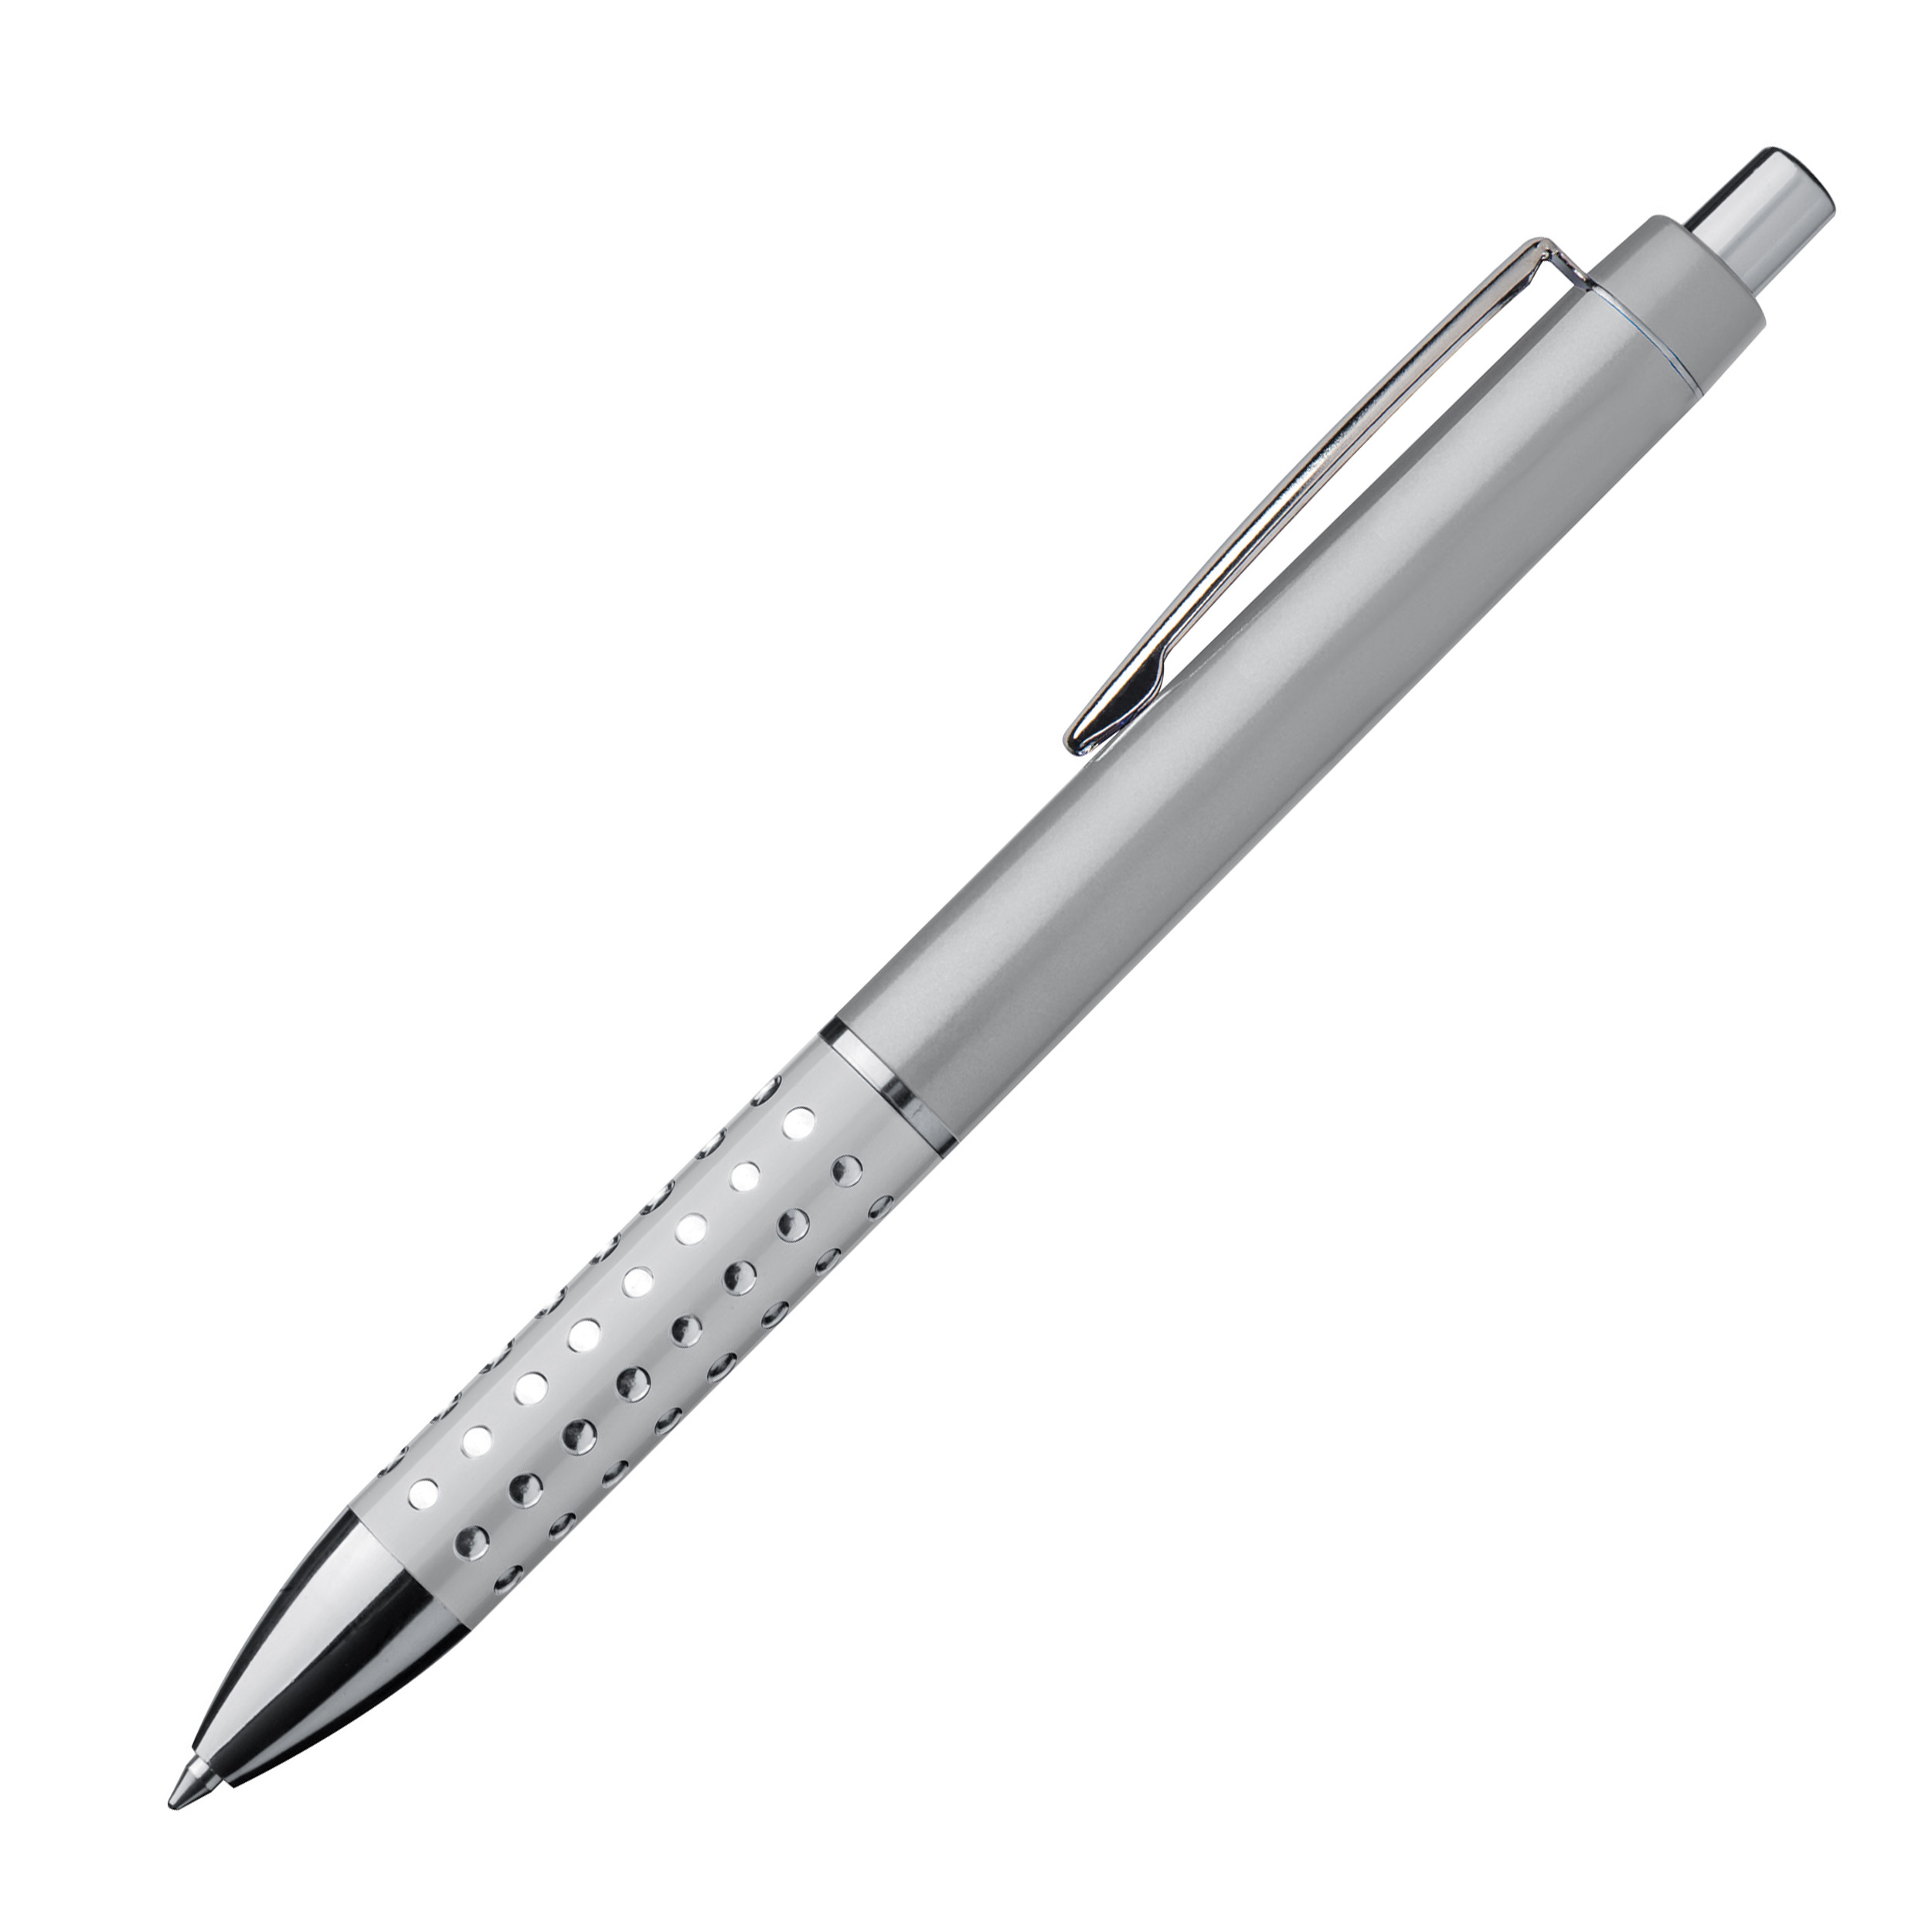 Plastic ball pen with sparkling dot grip zone